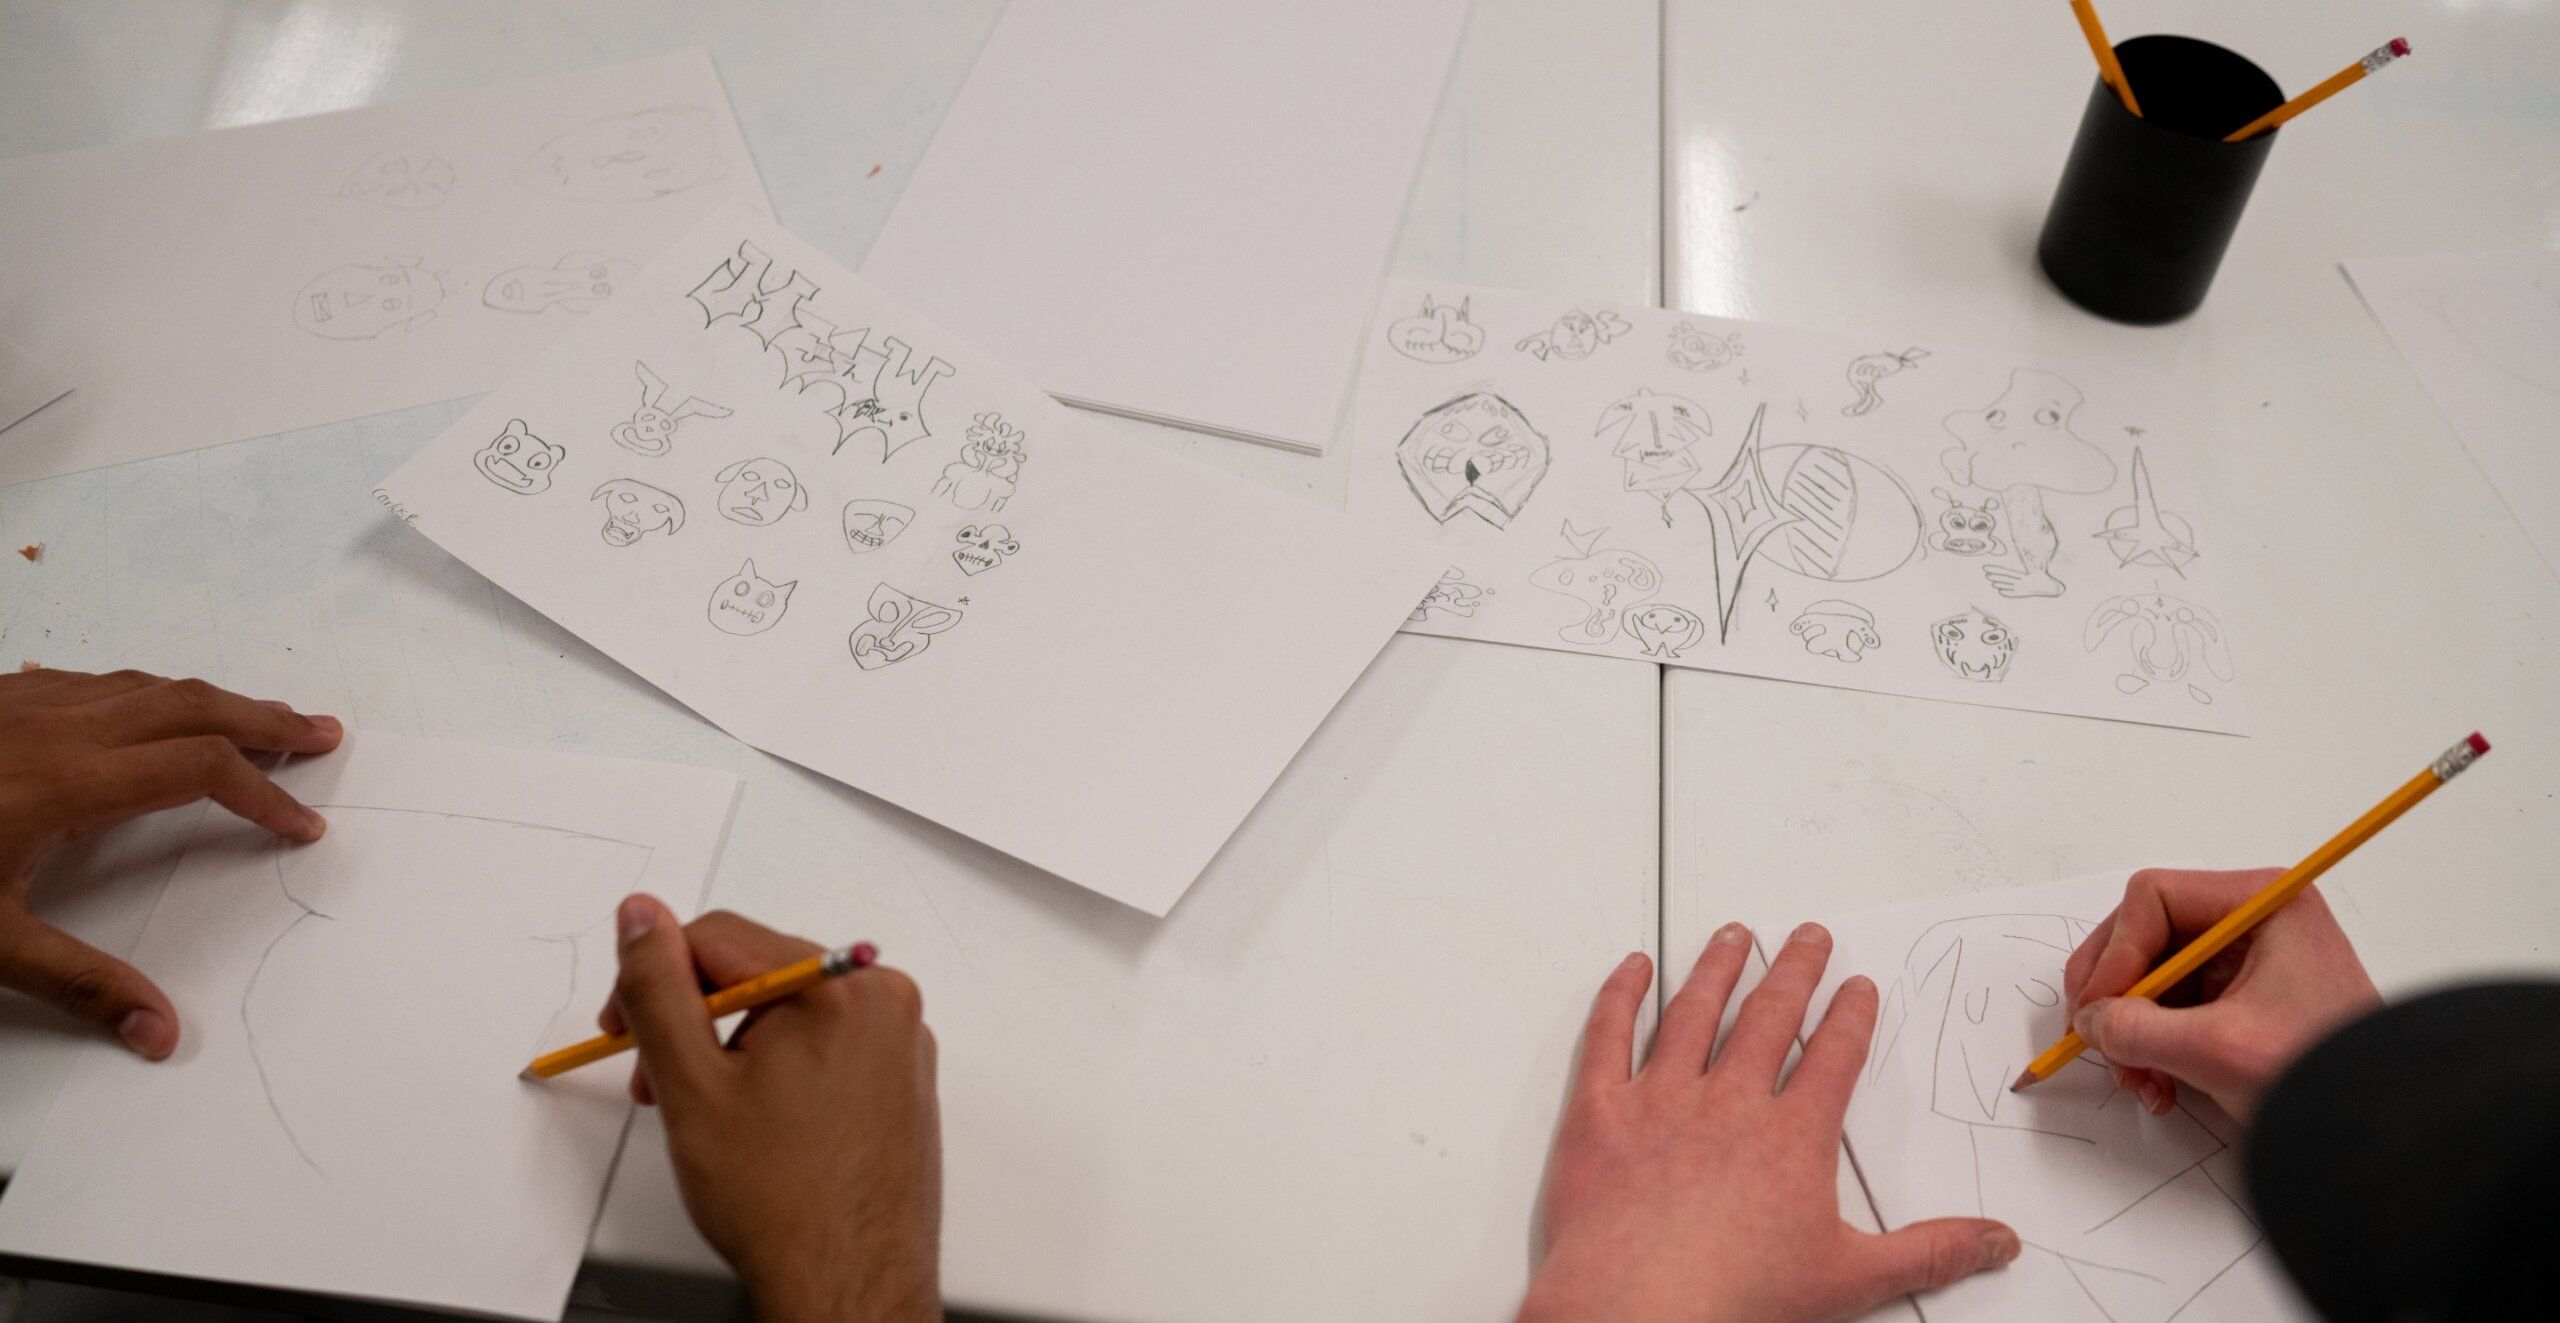 Two people sketching cartoon characters on white paper at a desk, with various drawings and pencils visible.